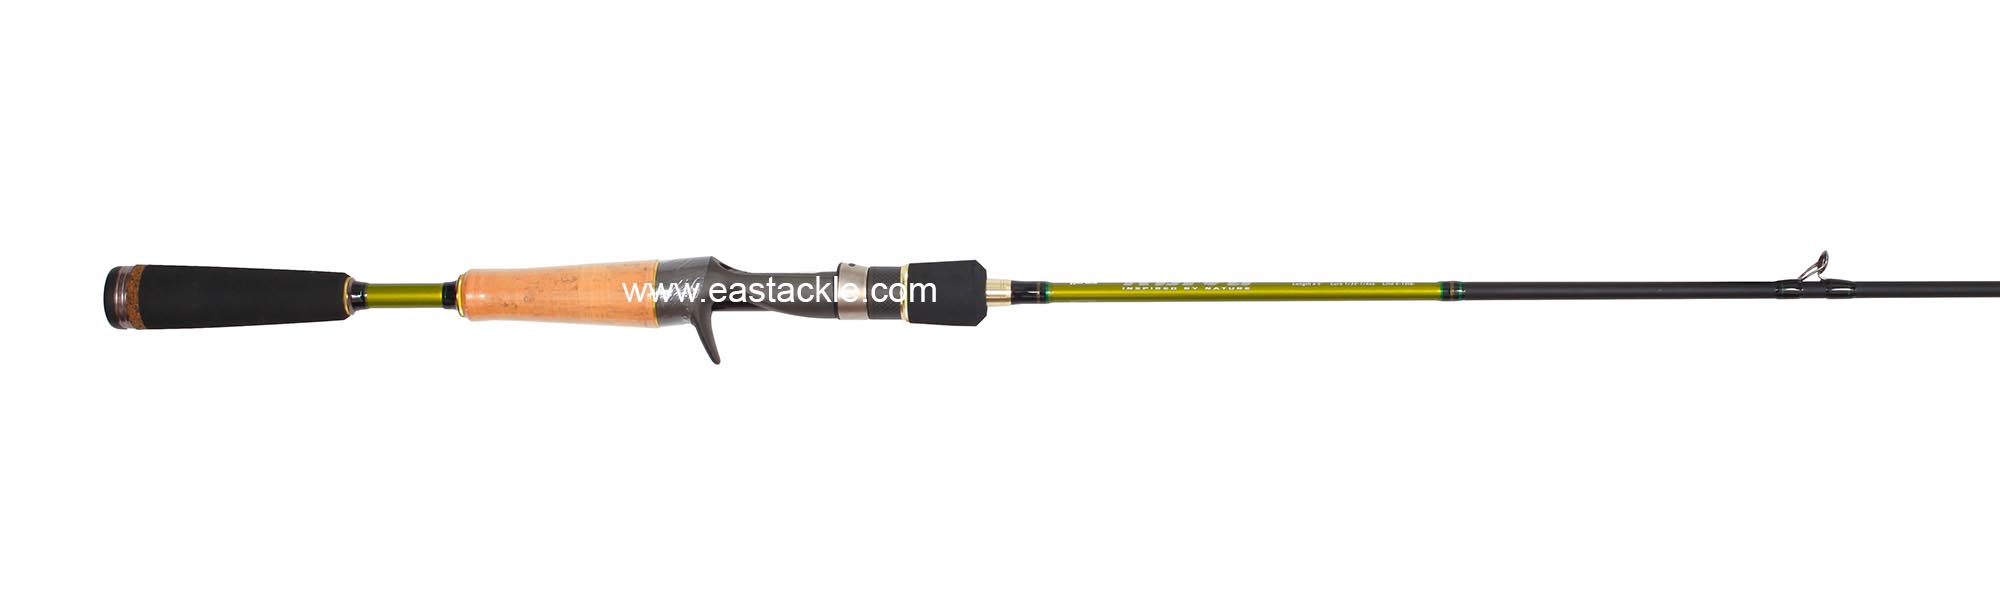 Rapala - Koivu - KVC661MH - Bait Casting Rod - Butt to Stripper Guide (Side View) | Eastackle